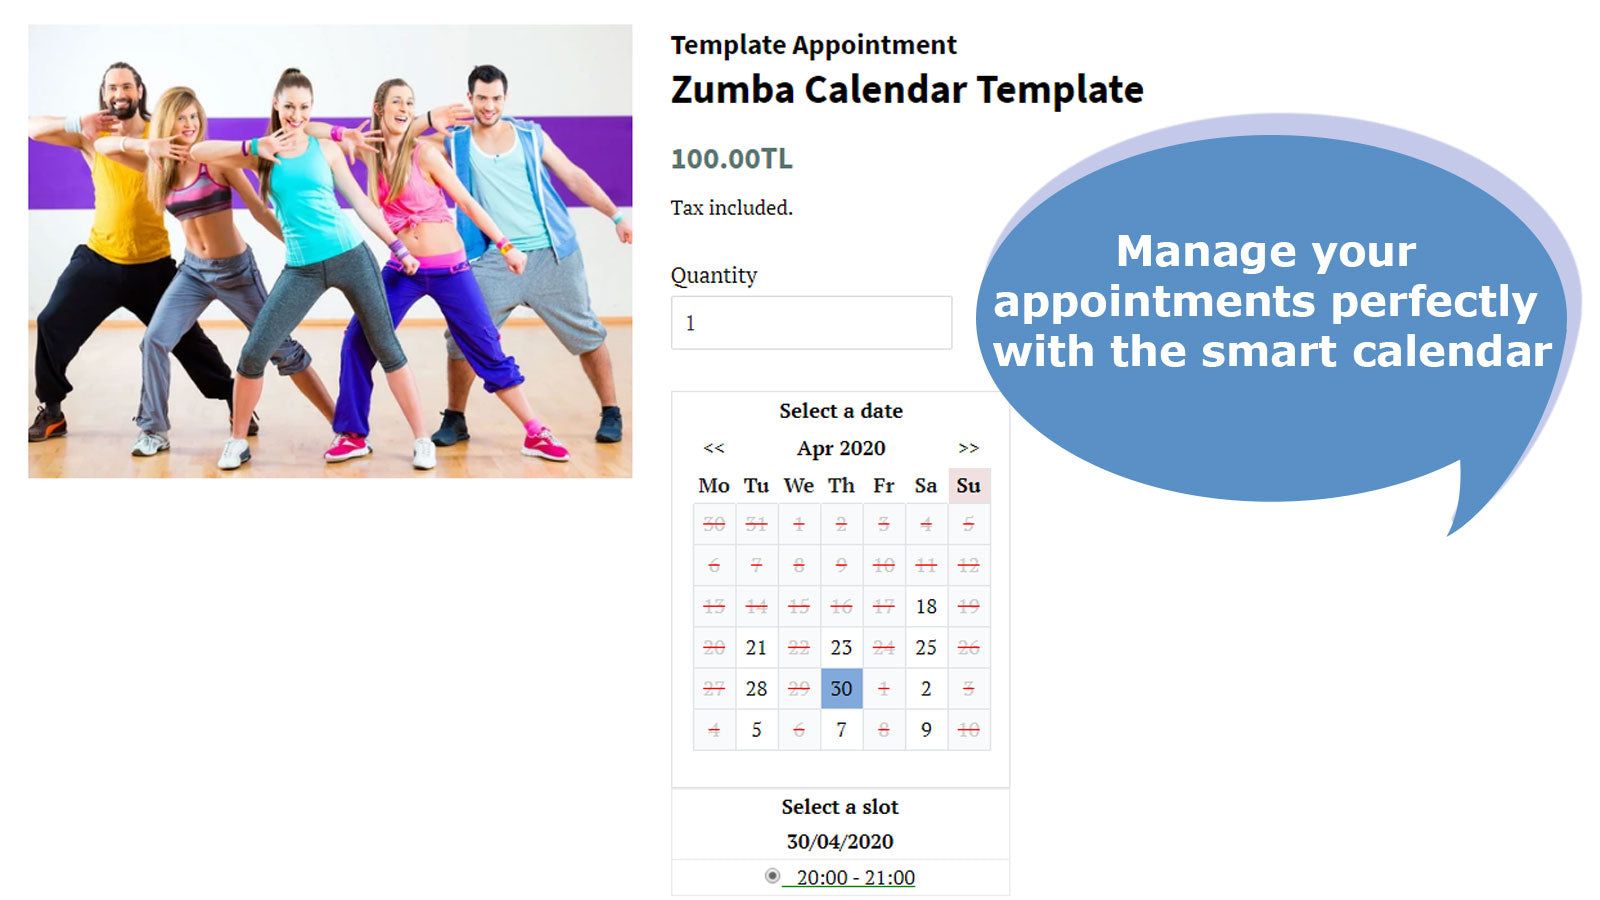 Smart calendar perfectly manages your appointments.